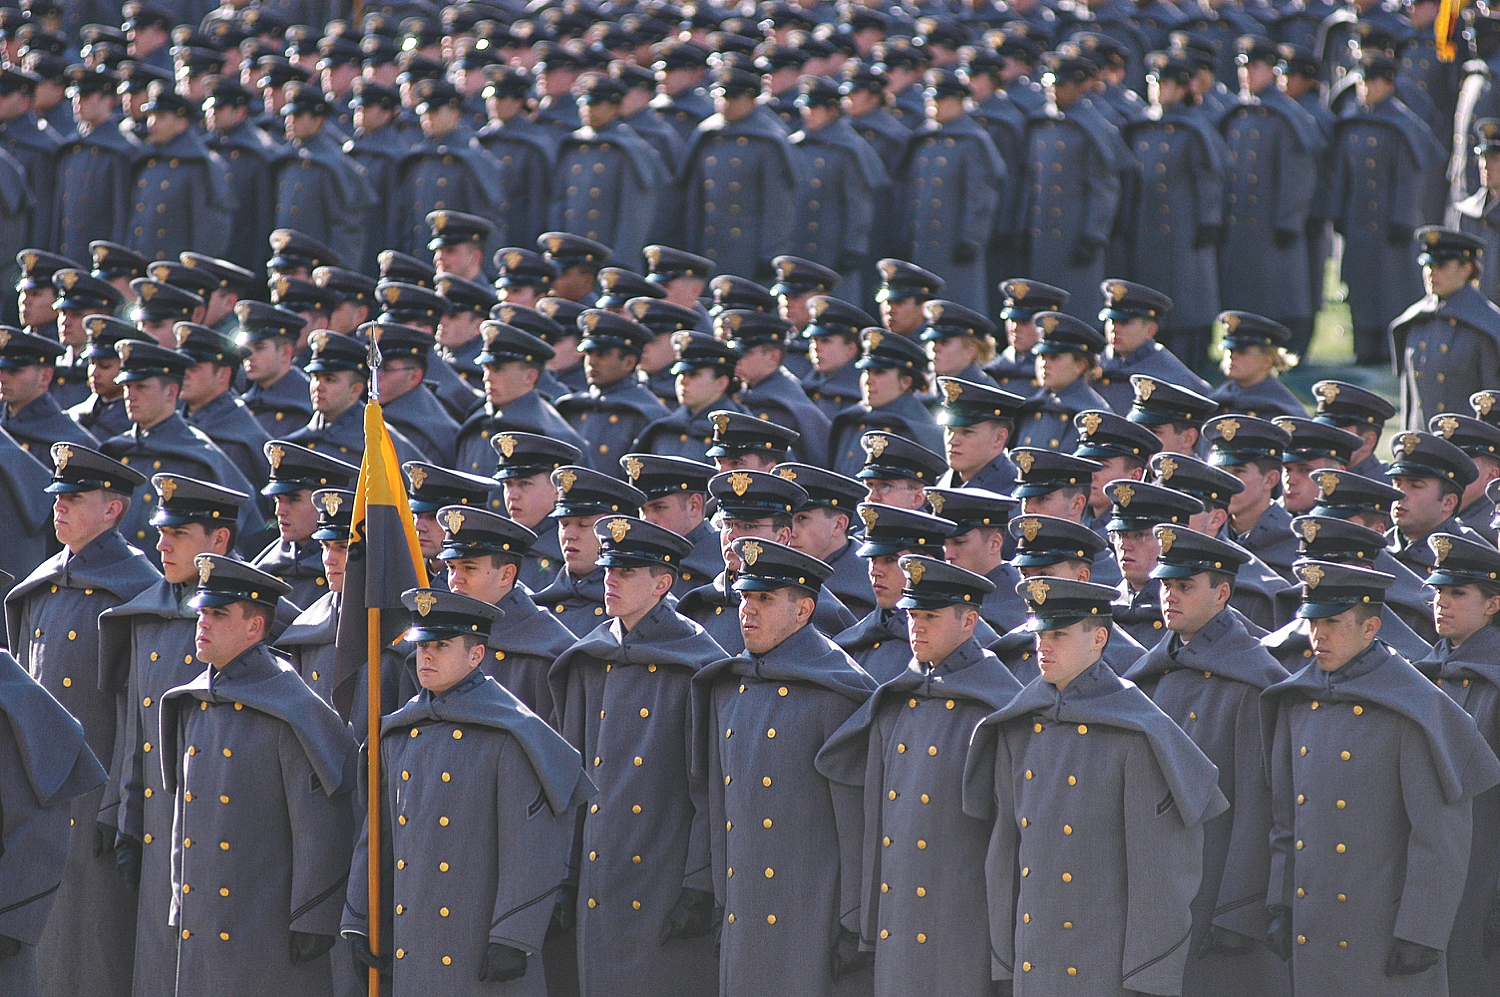 6-cadets-from-west-point-marching-on-army-navy-field.jpg